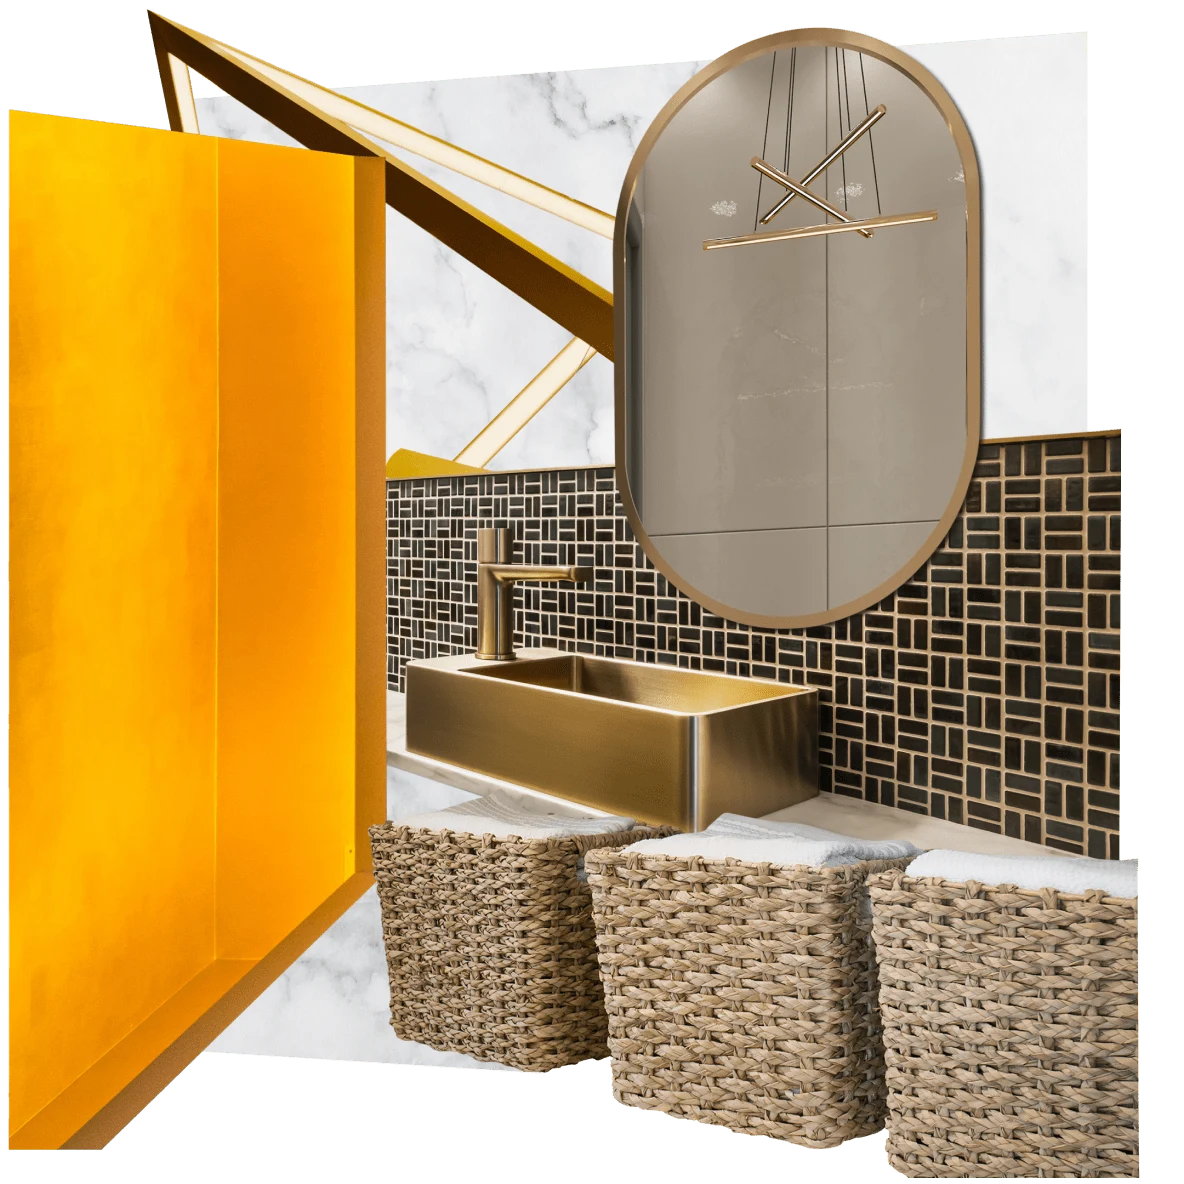 Collage of modern laundry room items: three wicker laundry baskets are in front of a black and gold-tiled wall with a square golden sink and a rounded mirror angling out from behind an orange wall.